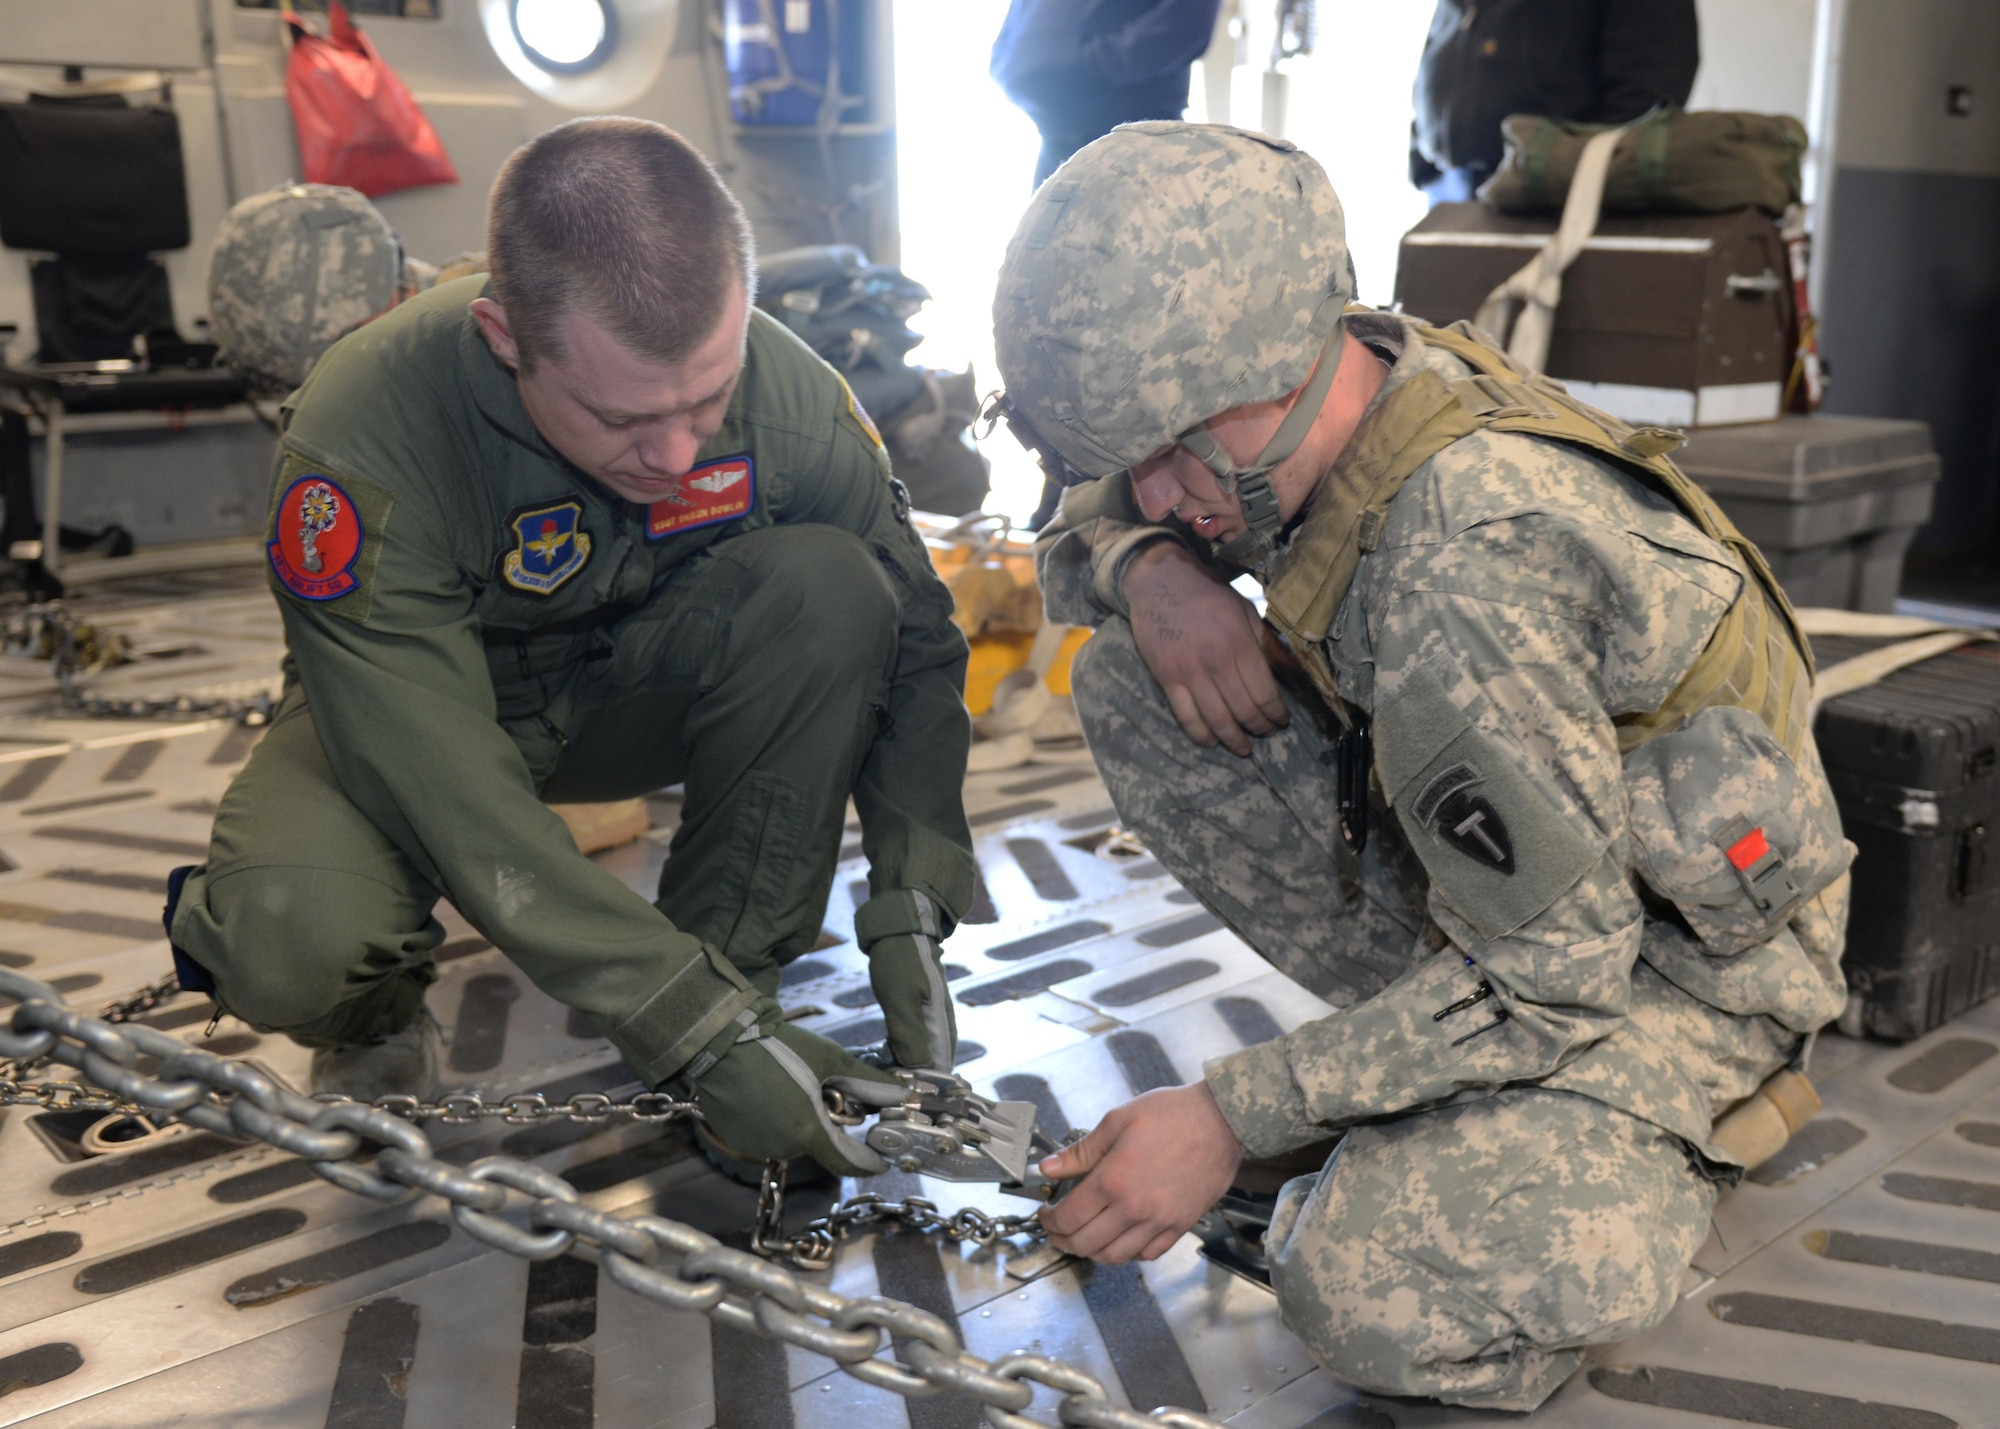 Air Force Staff Sgt. Shaun Bowlin coaches Army Spc. Matthew Crisman on tightening the cargo hold chains, ensuring the cargo is secured properly on an Air Force C-17 Globemaster III March 27, 2015, at Perrin Airfield, Texas. The aircrew from Altus Air Force Base, Oklahoma, met with Soldiers from the 1st Battalion (Airborne), 143rd Infantry Regiment, for a joint-force exercise. Bowlin is a loadmaster assigned to the 58th Airlift Squadron and Crisman is an infantryman assigned to the 143rd IR. (U.S. Air Force photo/Senior Airman J. Zuriel Lee)